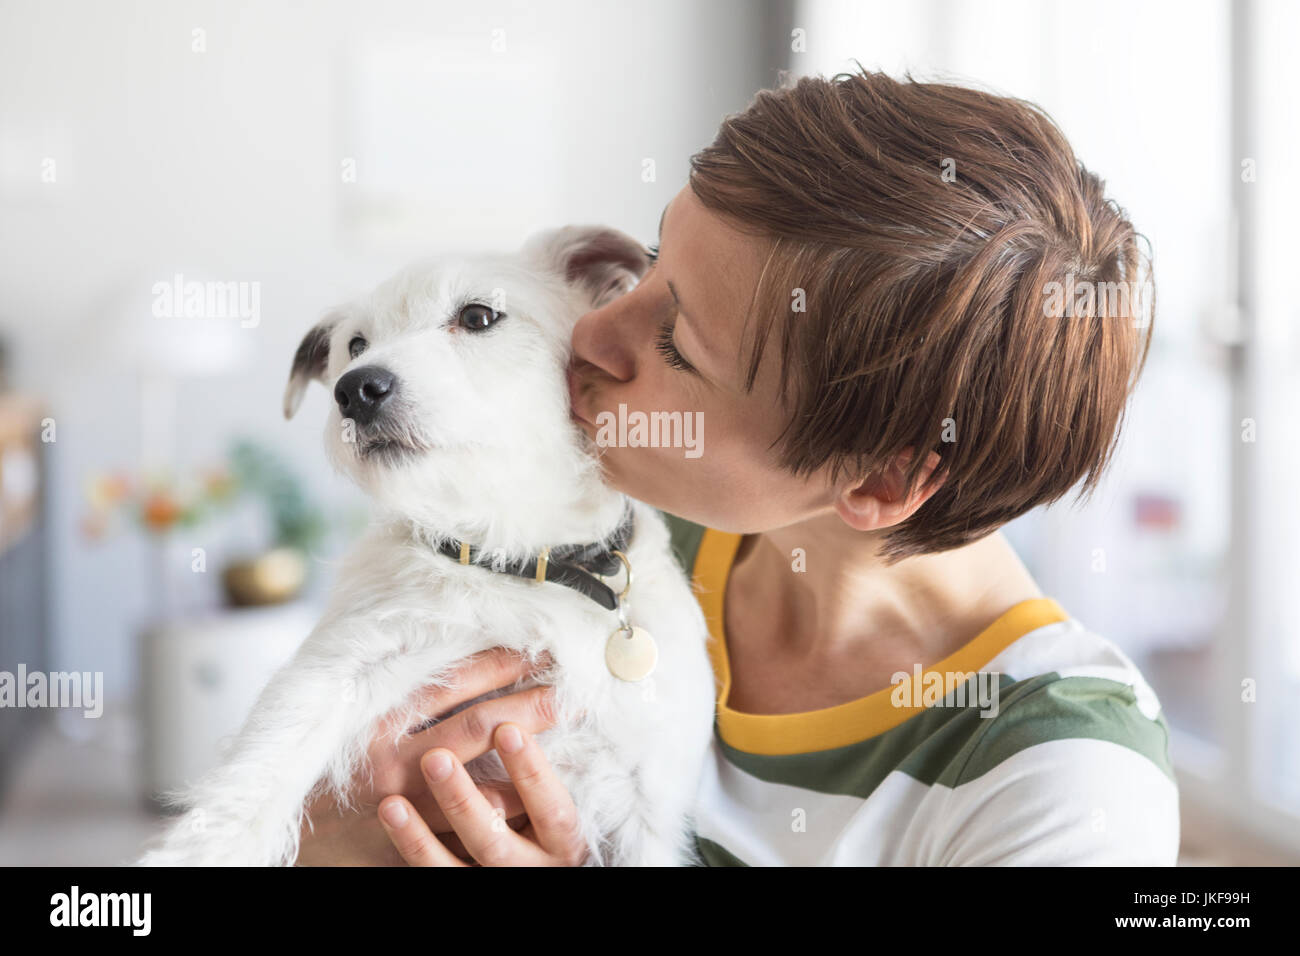 Woman kissing her dog Stock Photo